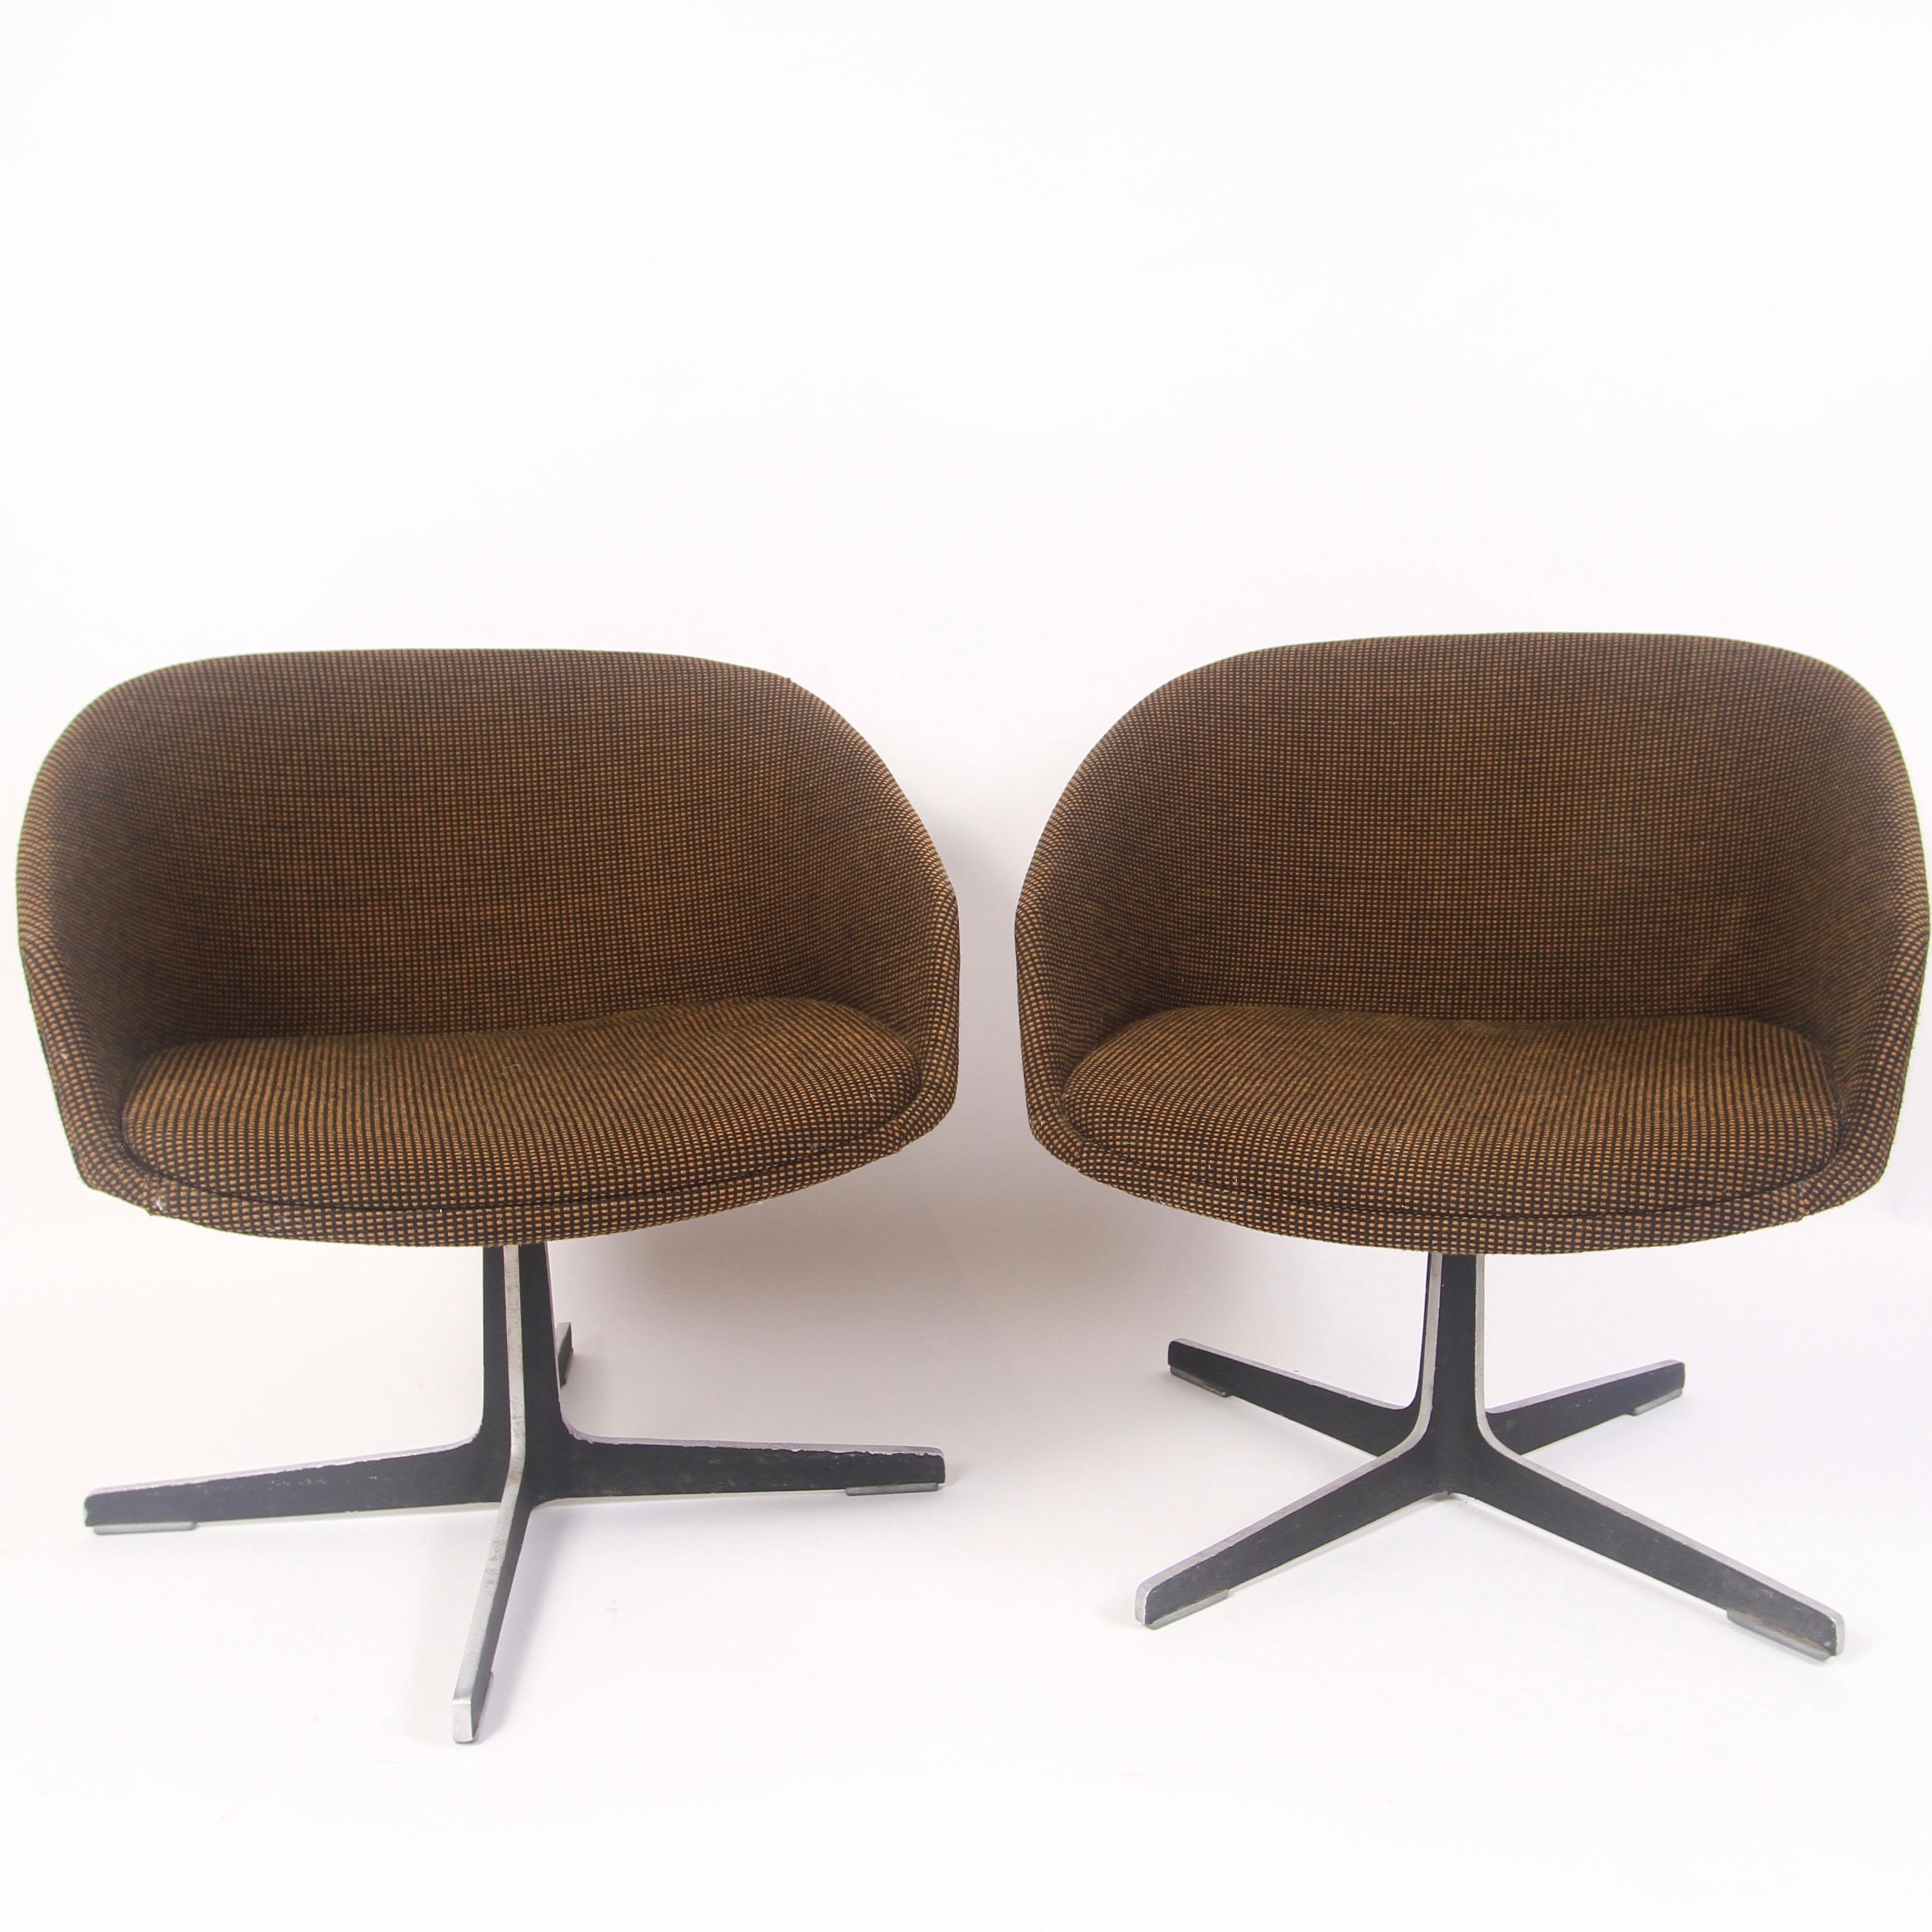 1960s survivors. Nice pair of swivel chairs by Brooklyn based chair maker I.V Chair Corporation. Very much in the manner of the Overman pod chairs. Brown and black checkered fabric with a heavy black trimmed steel base. One paper label still